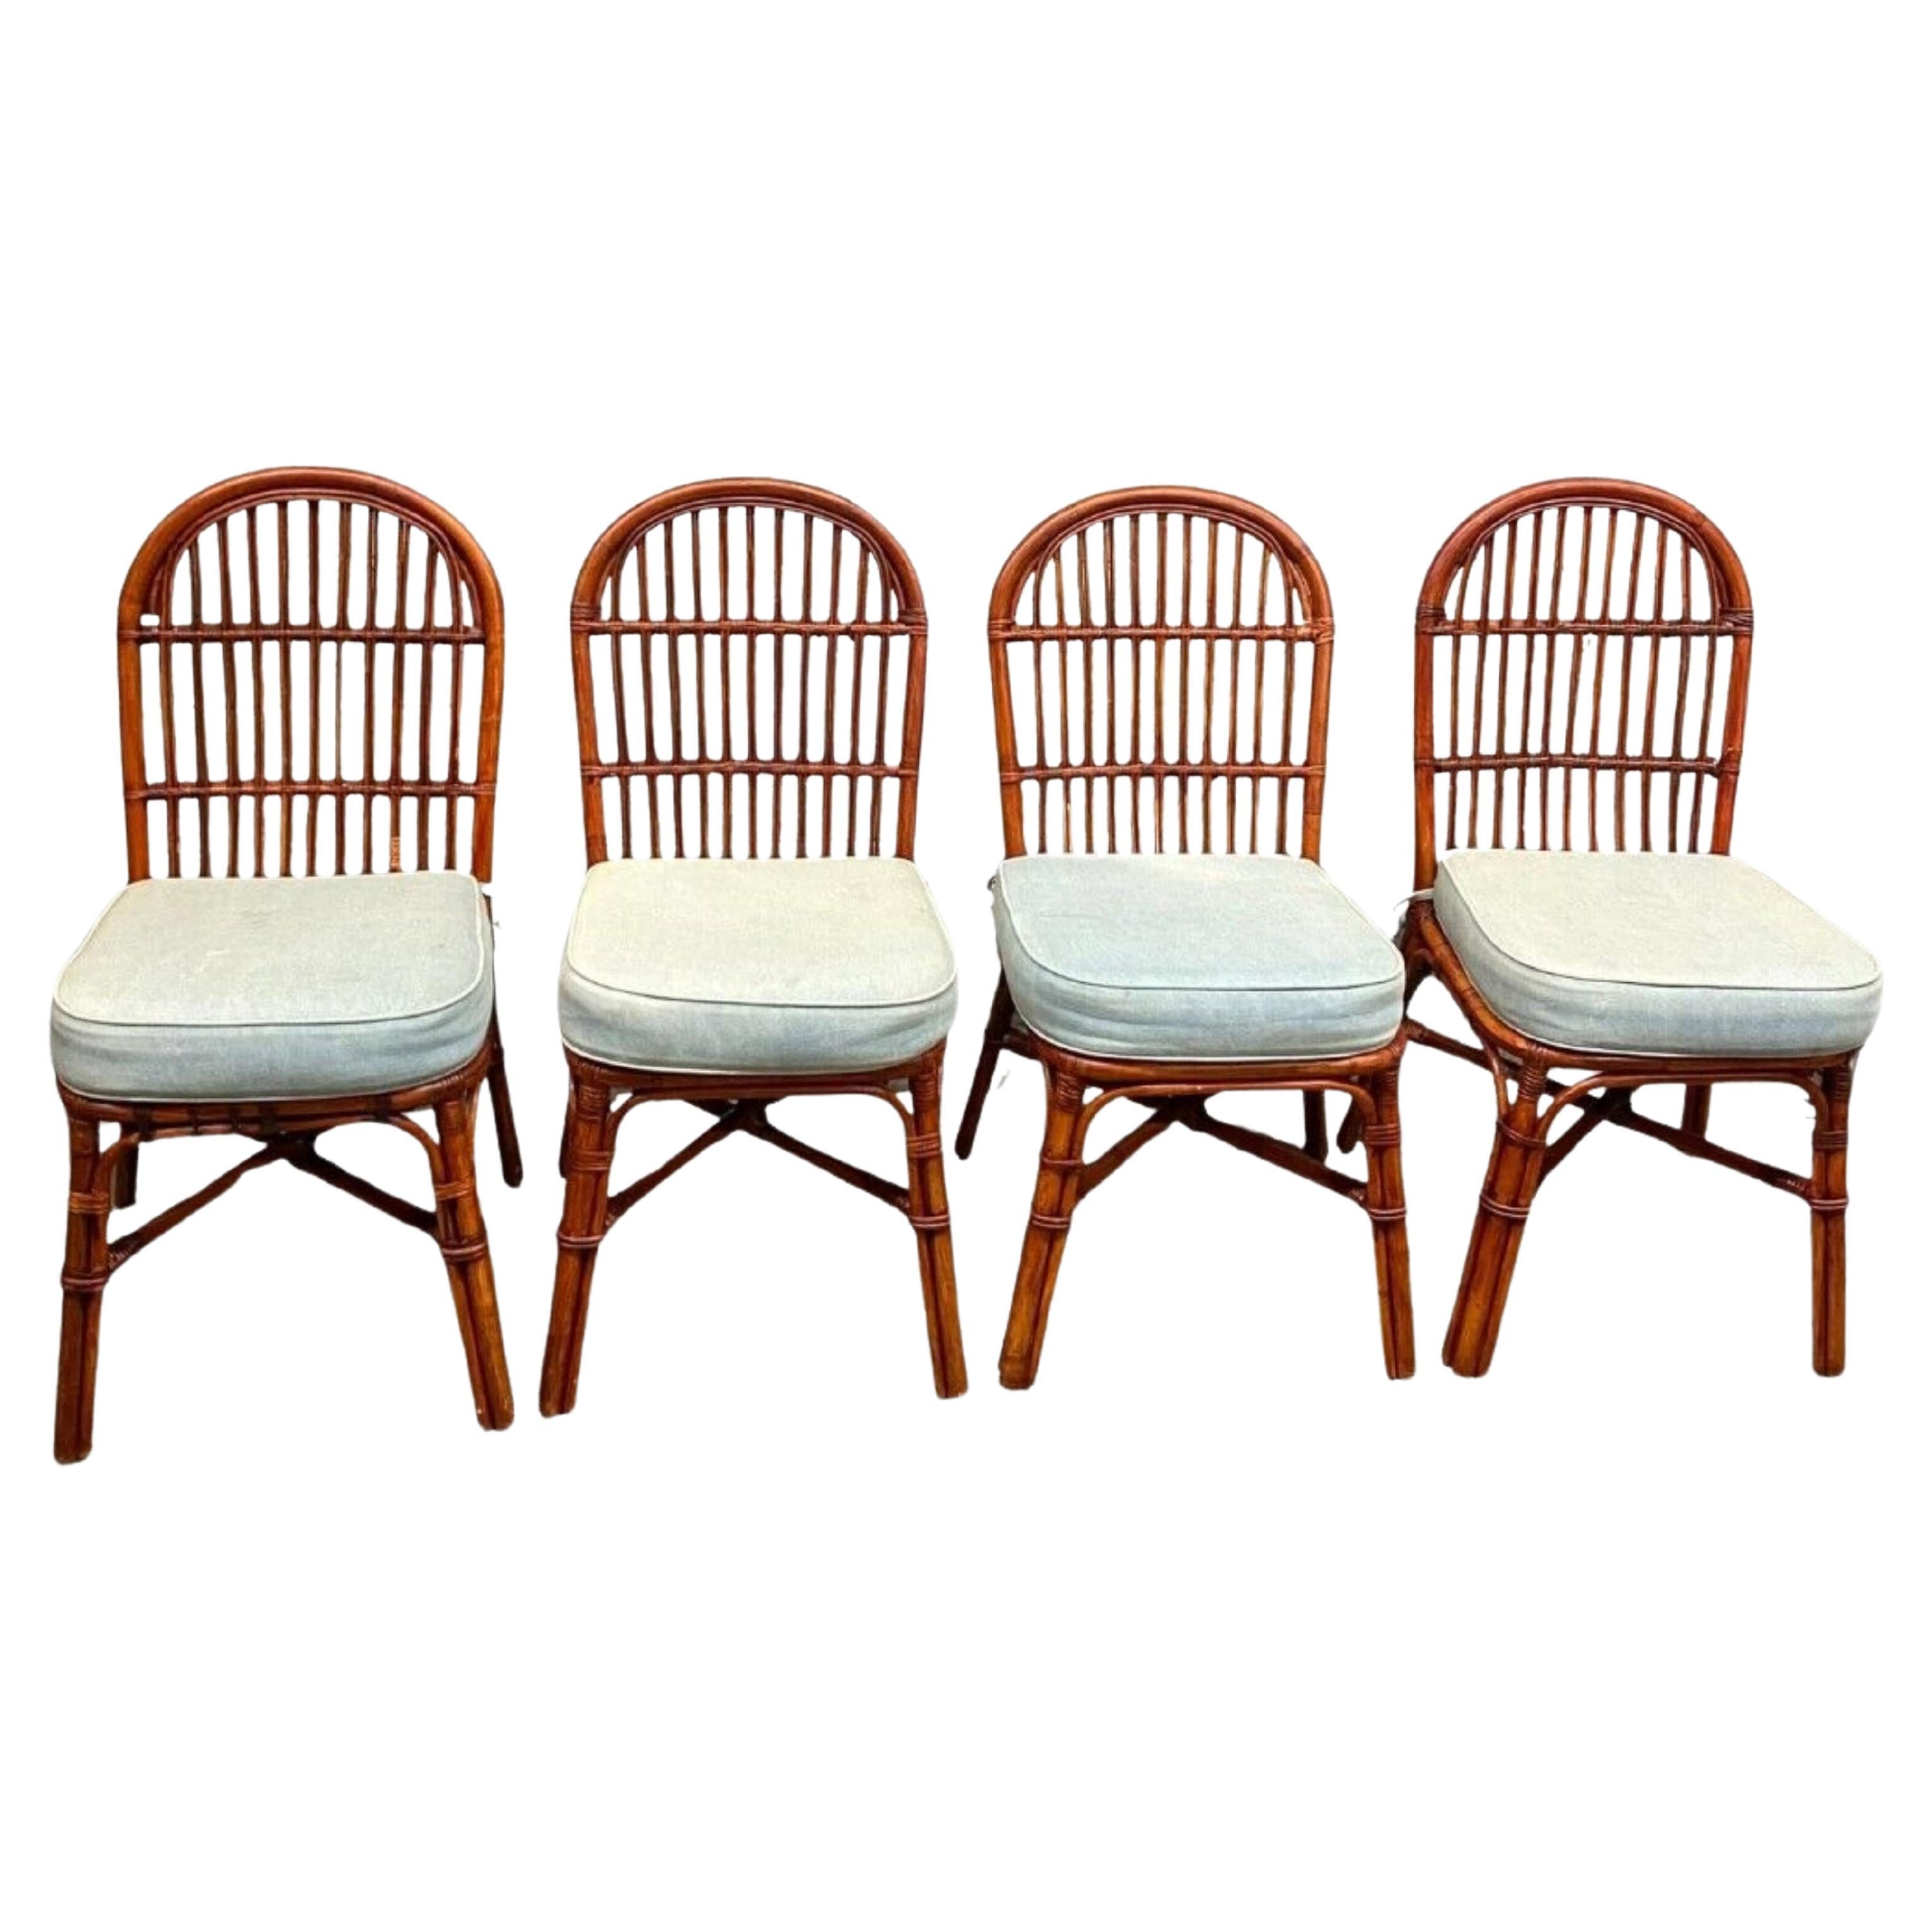 Vintage Hollywood Regency Palm Beach Bamboo Dining Side Chairs - Set of 4 For Sale